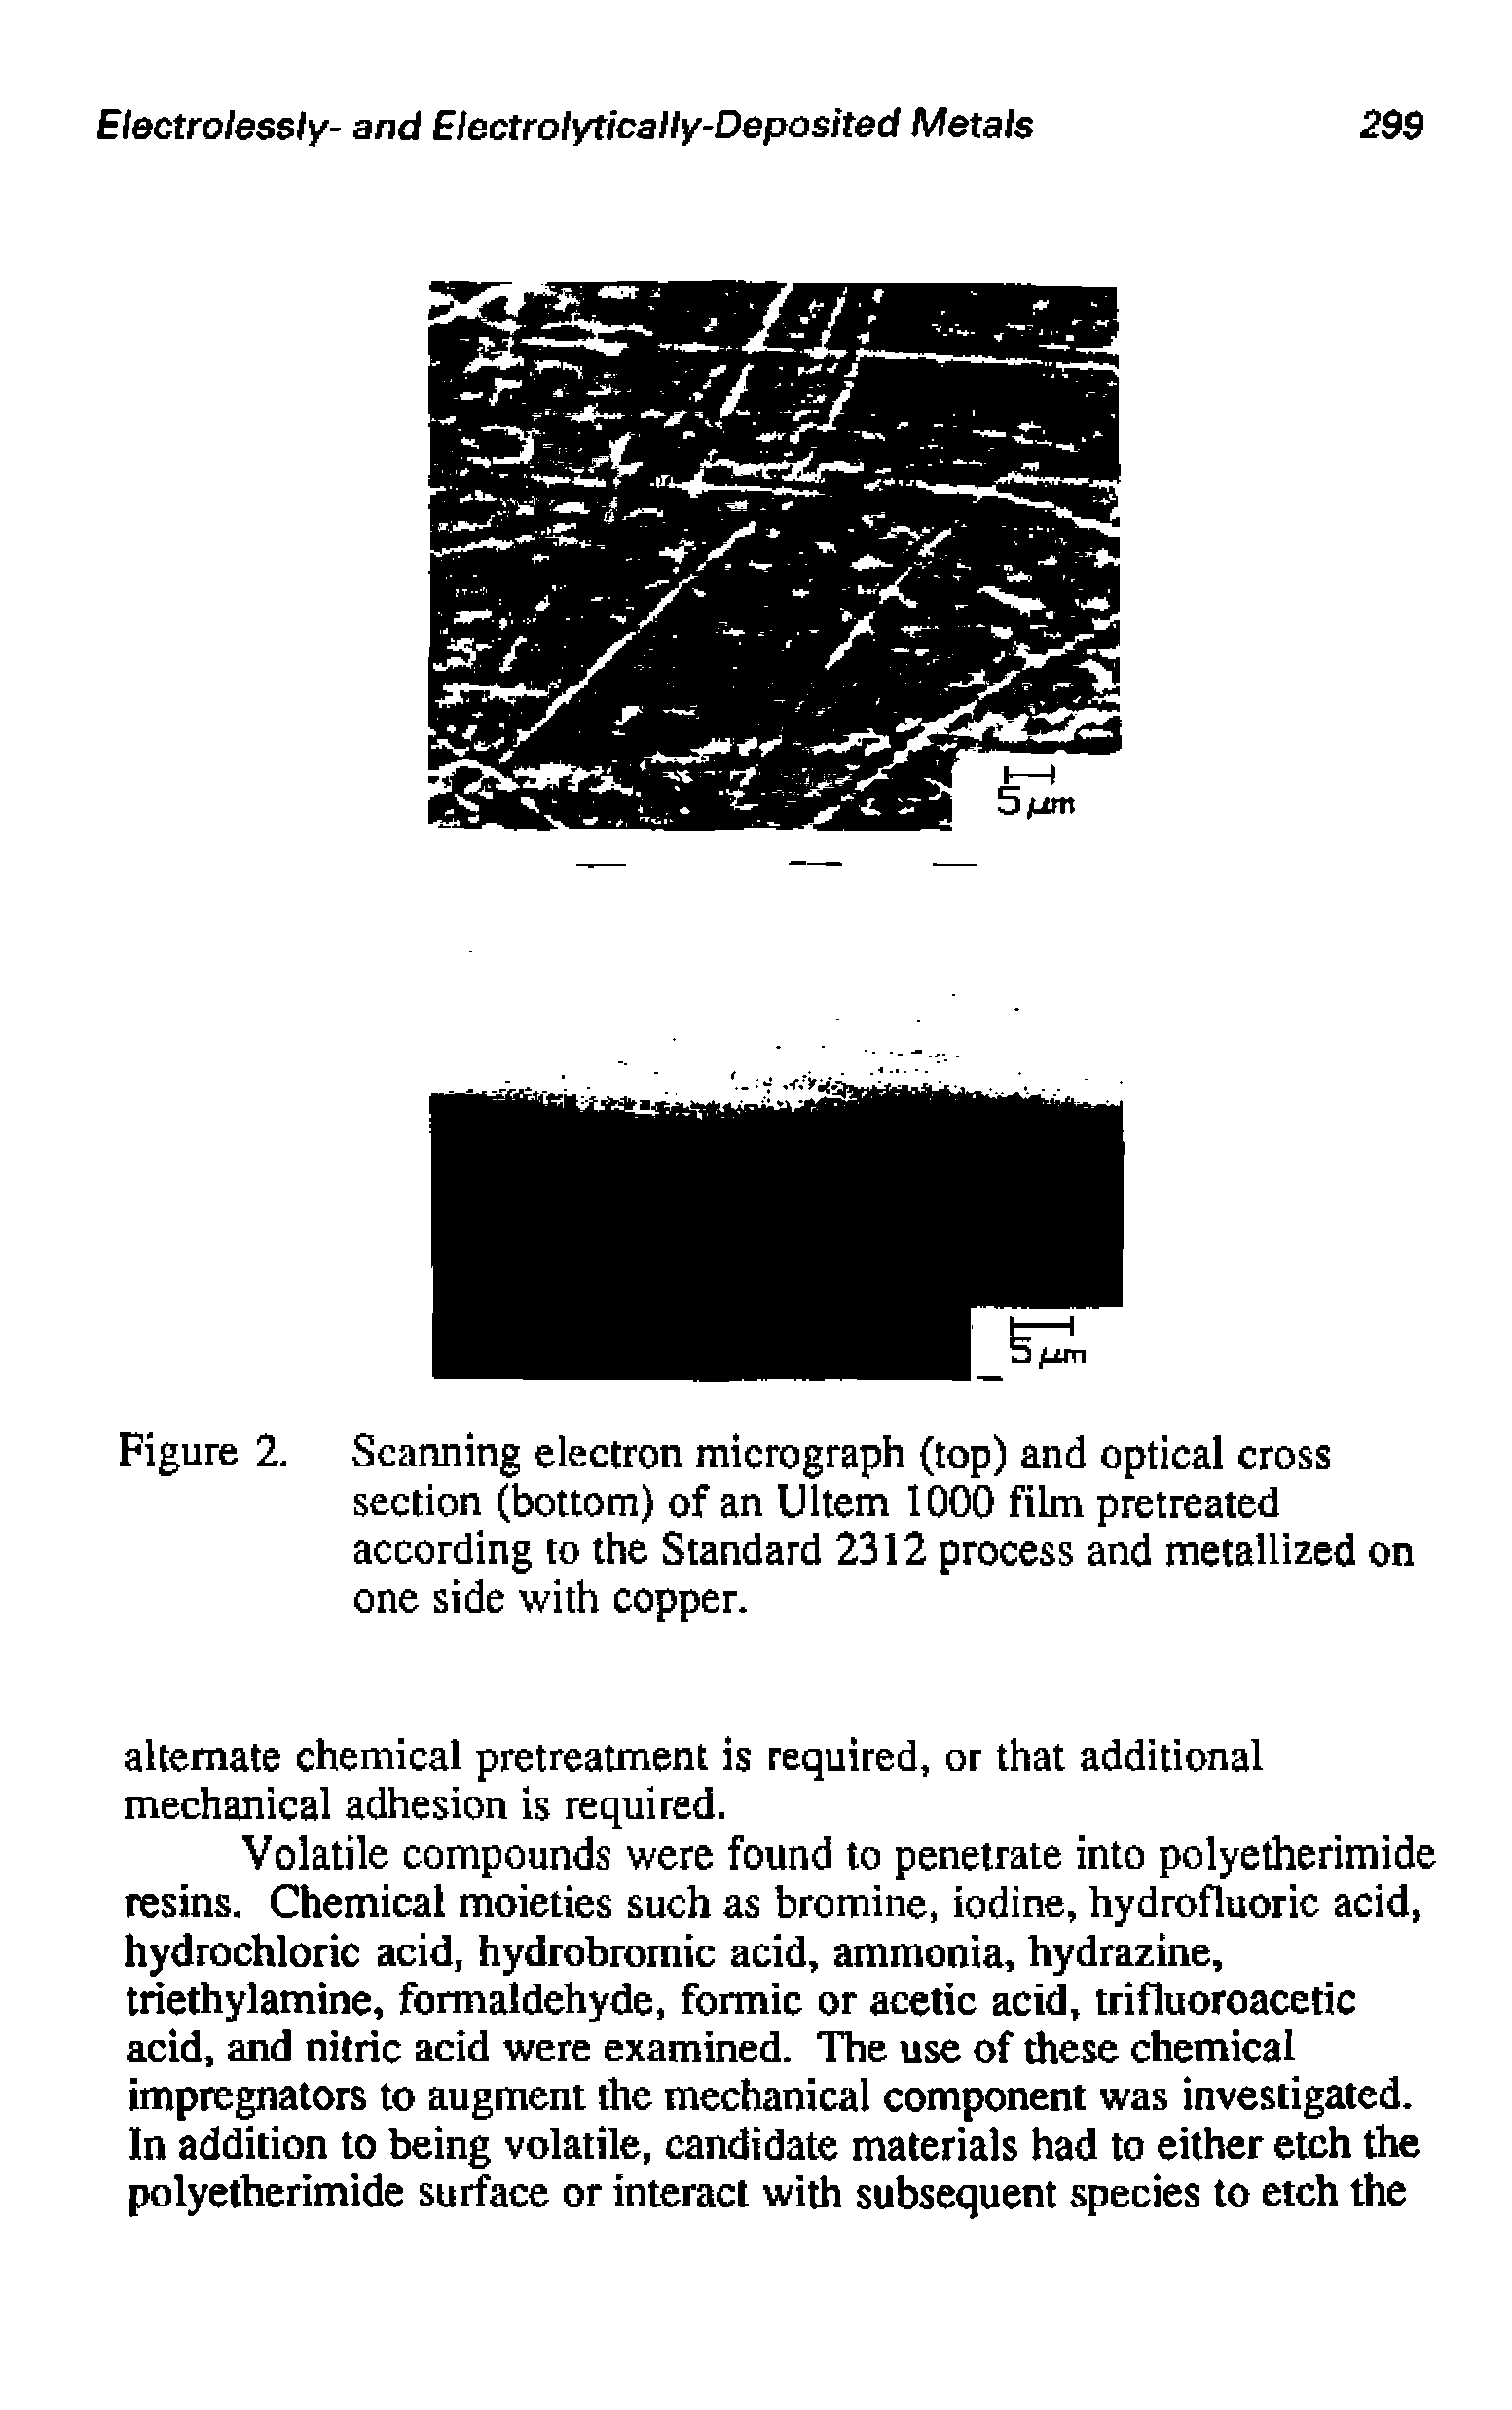 Figure 2. Scanning electron micrograph (top) and optical cross section (bottom) of an Ultem 1000 film pretreated according to the Standard 2312 process and metallized on one side with copper.